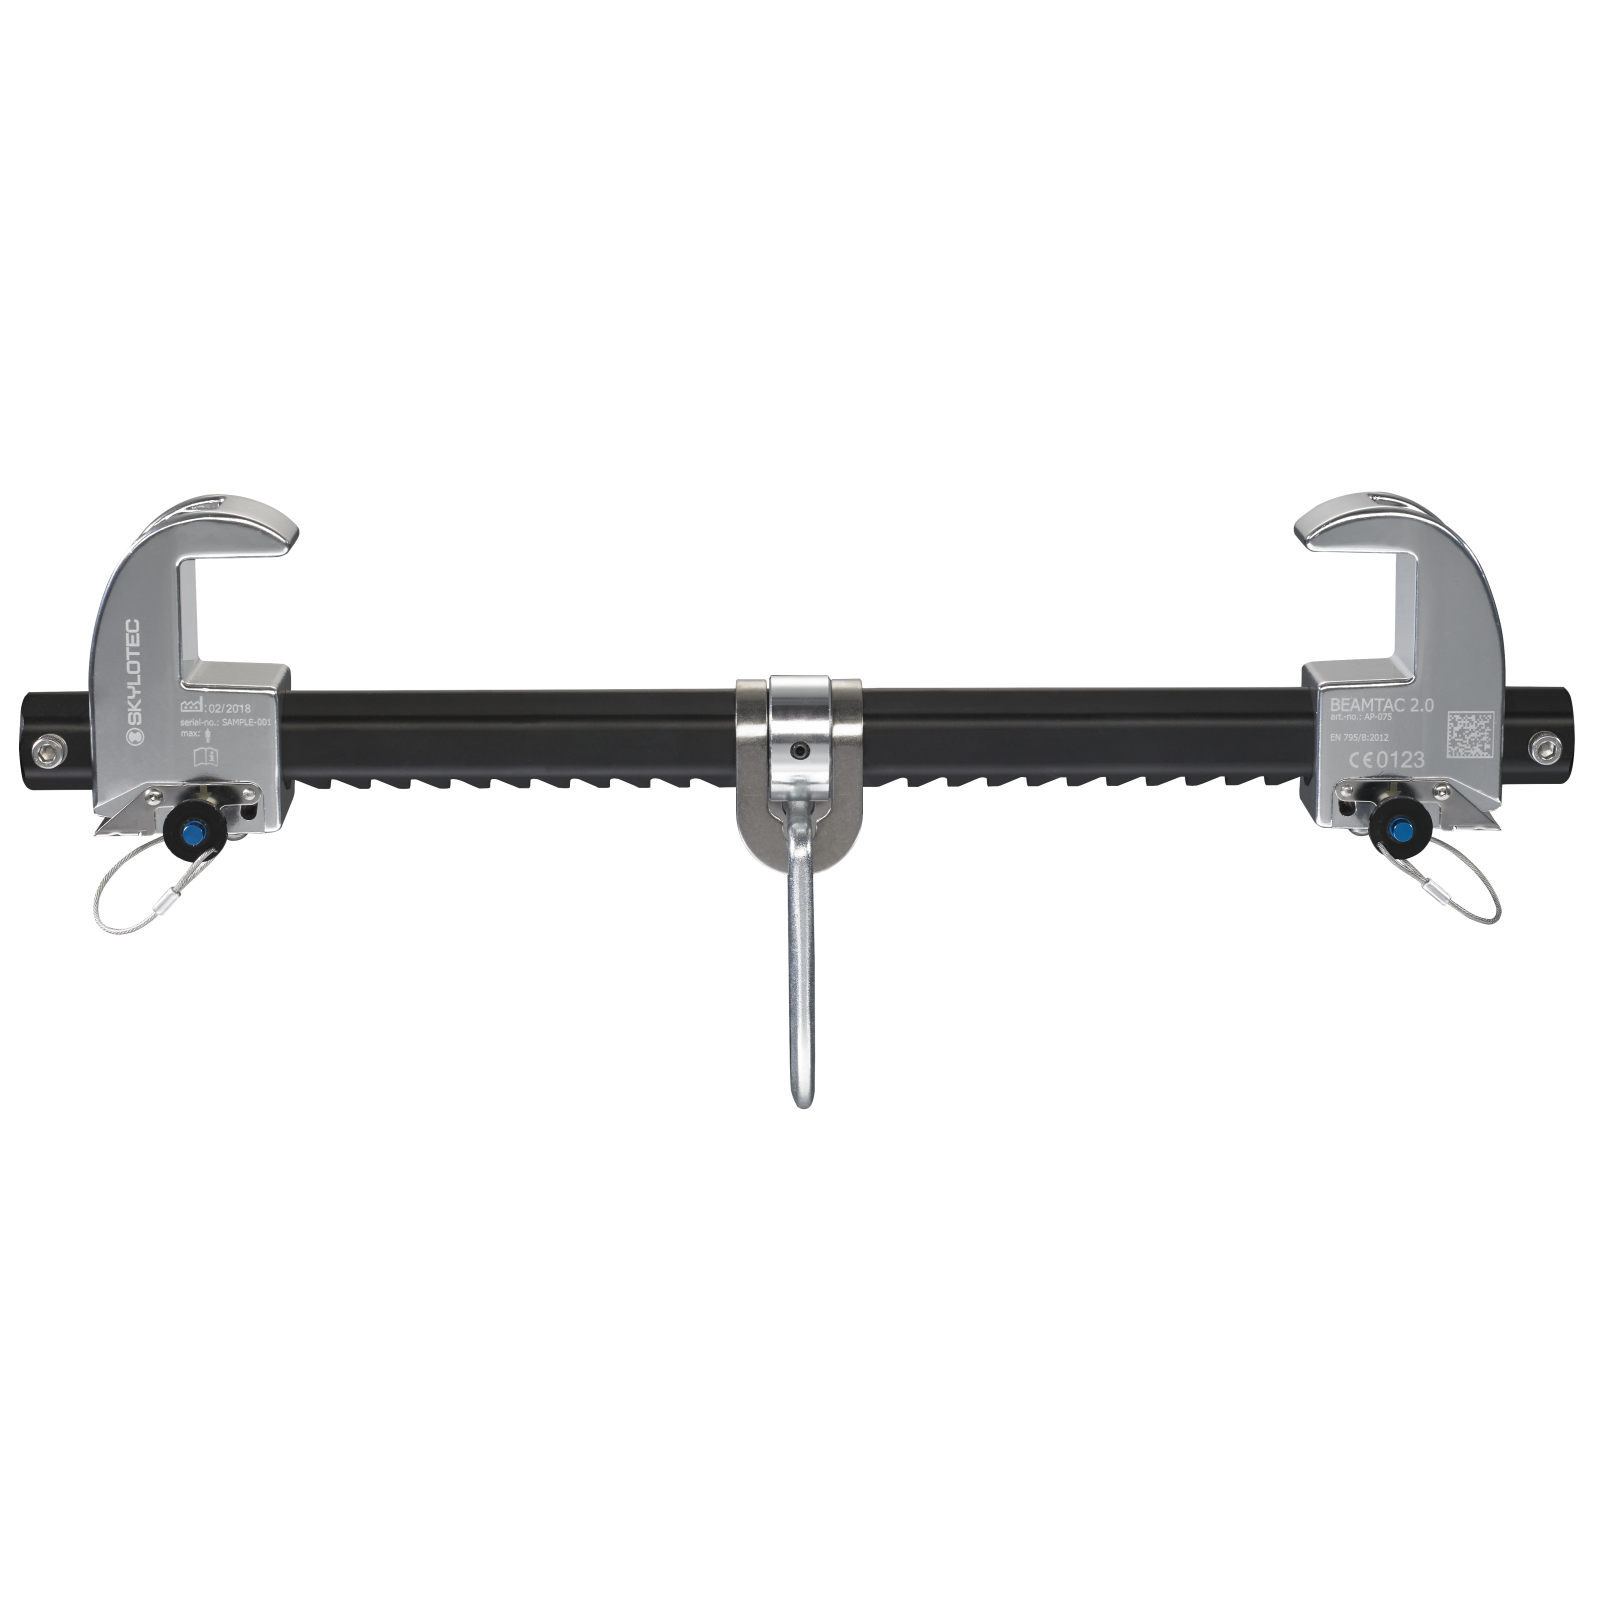 The adjustable clamping jaws ensure rapid and simple attachment to steel beams, whilst the multi-level safety system reliably prevents any unwanted movement or slipping during use.